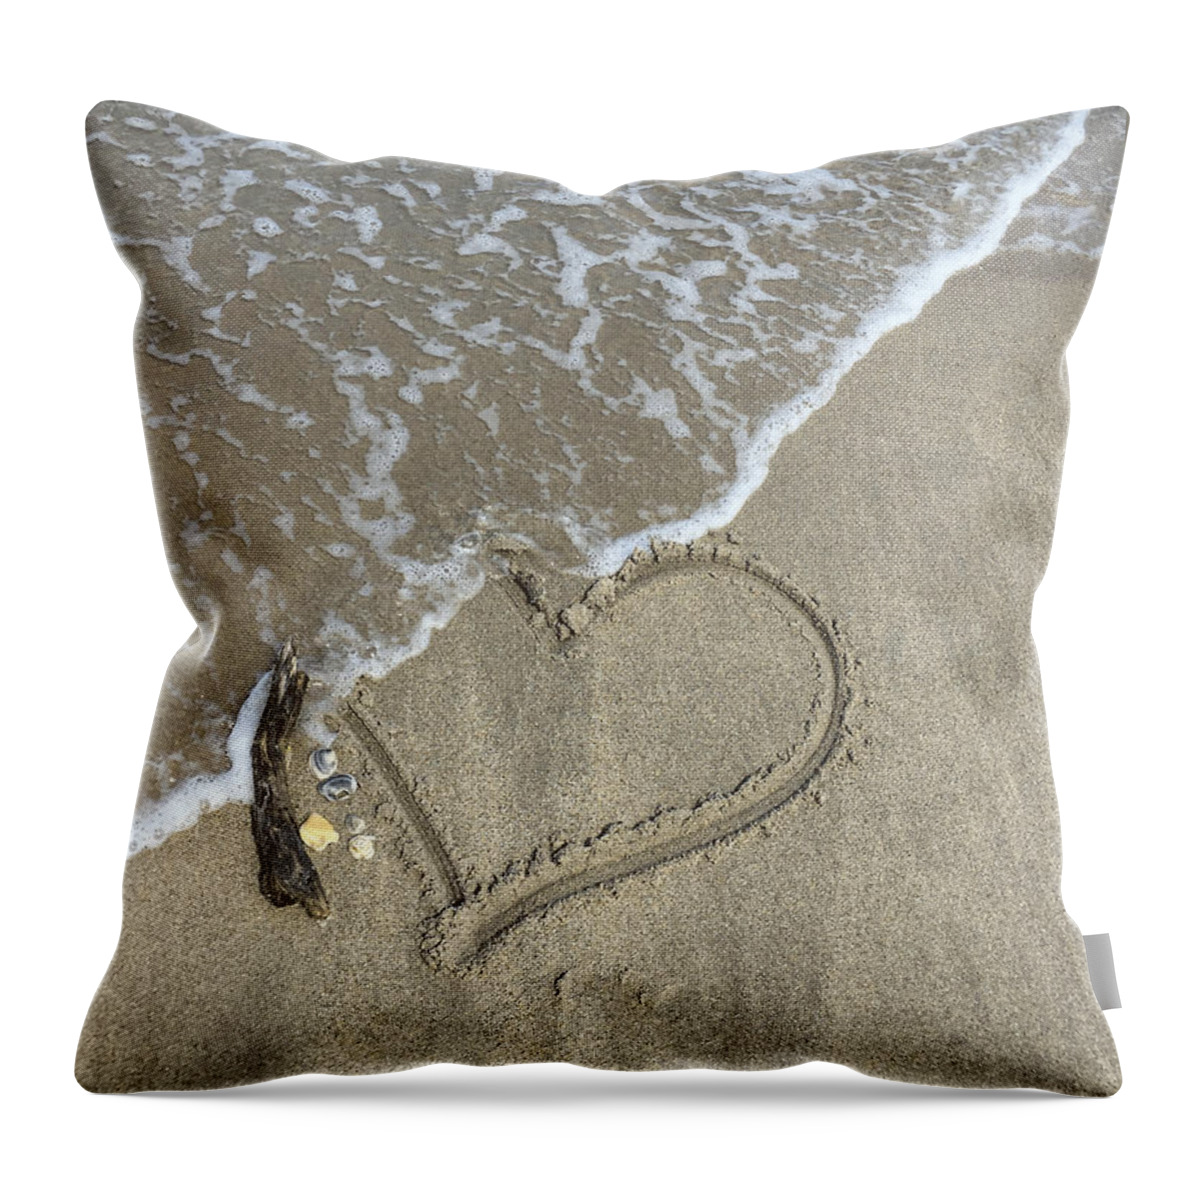 Heart Throw Pillow featuring the photograph Heart Lost by Arlene Carmel